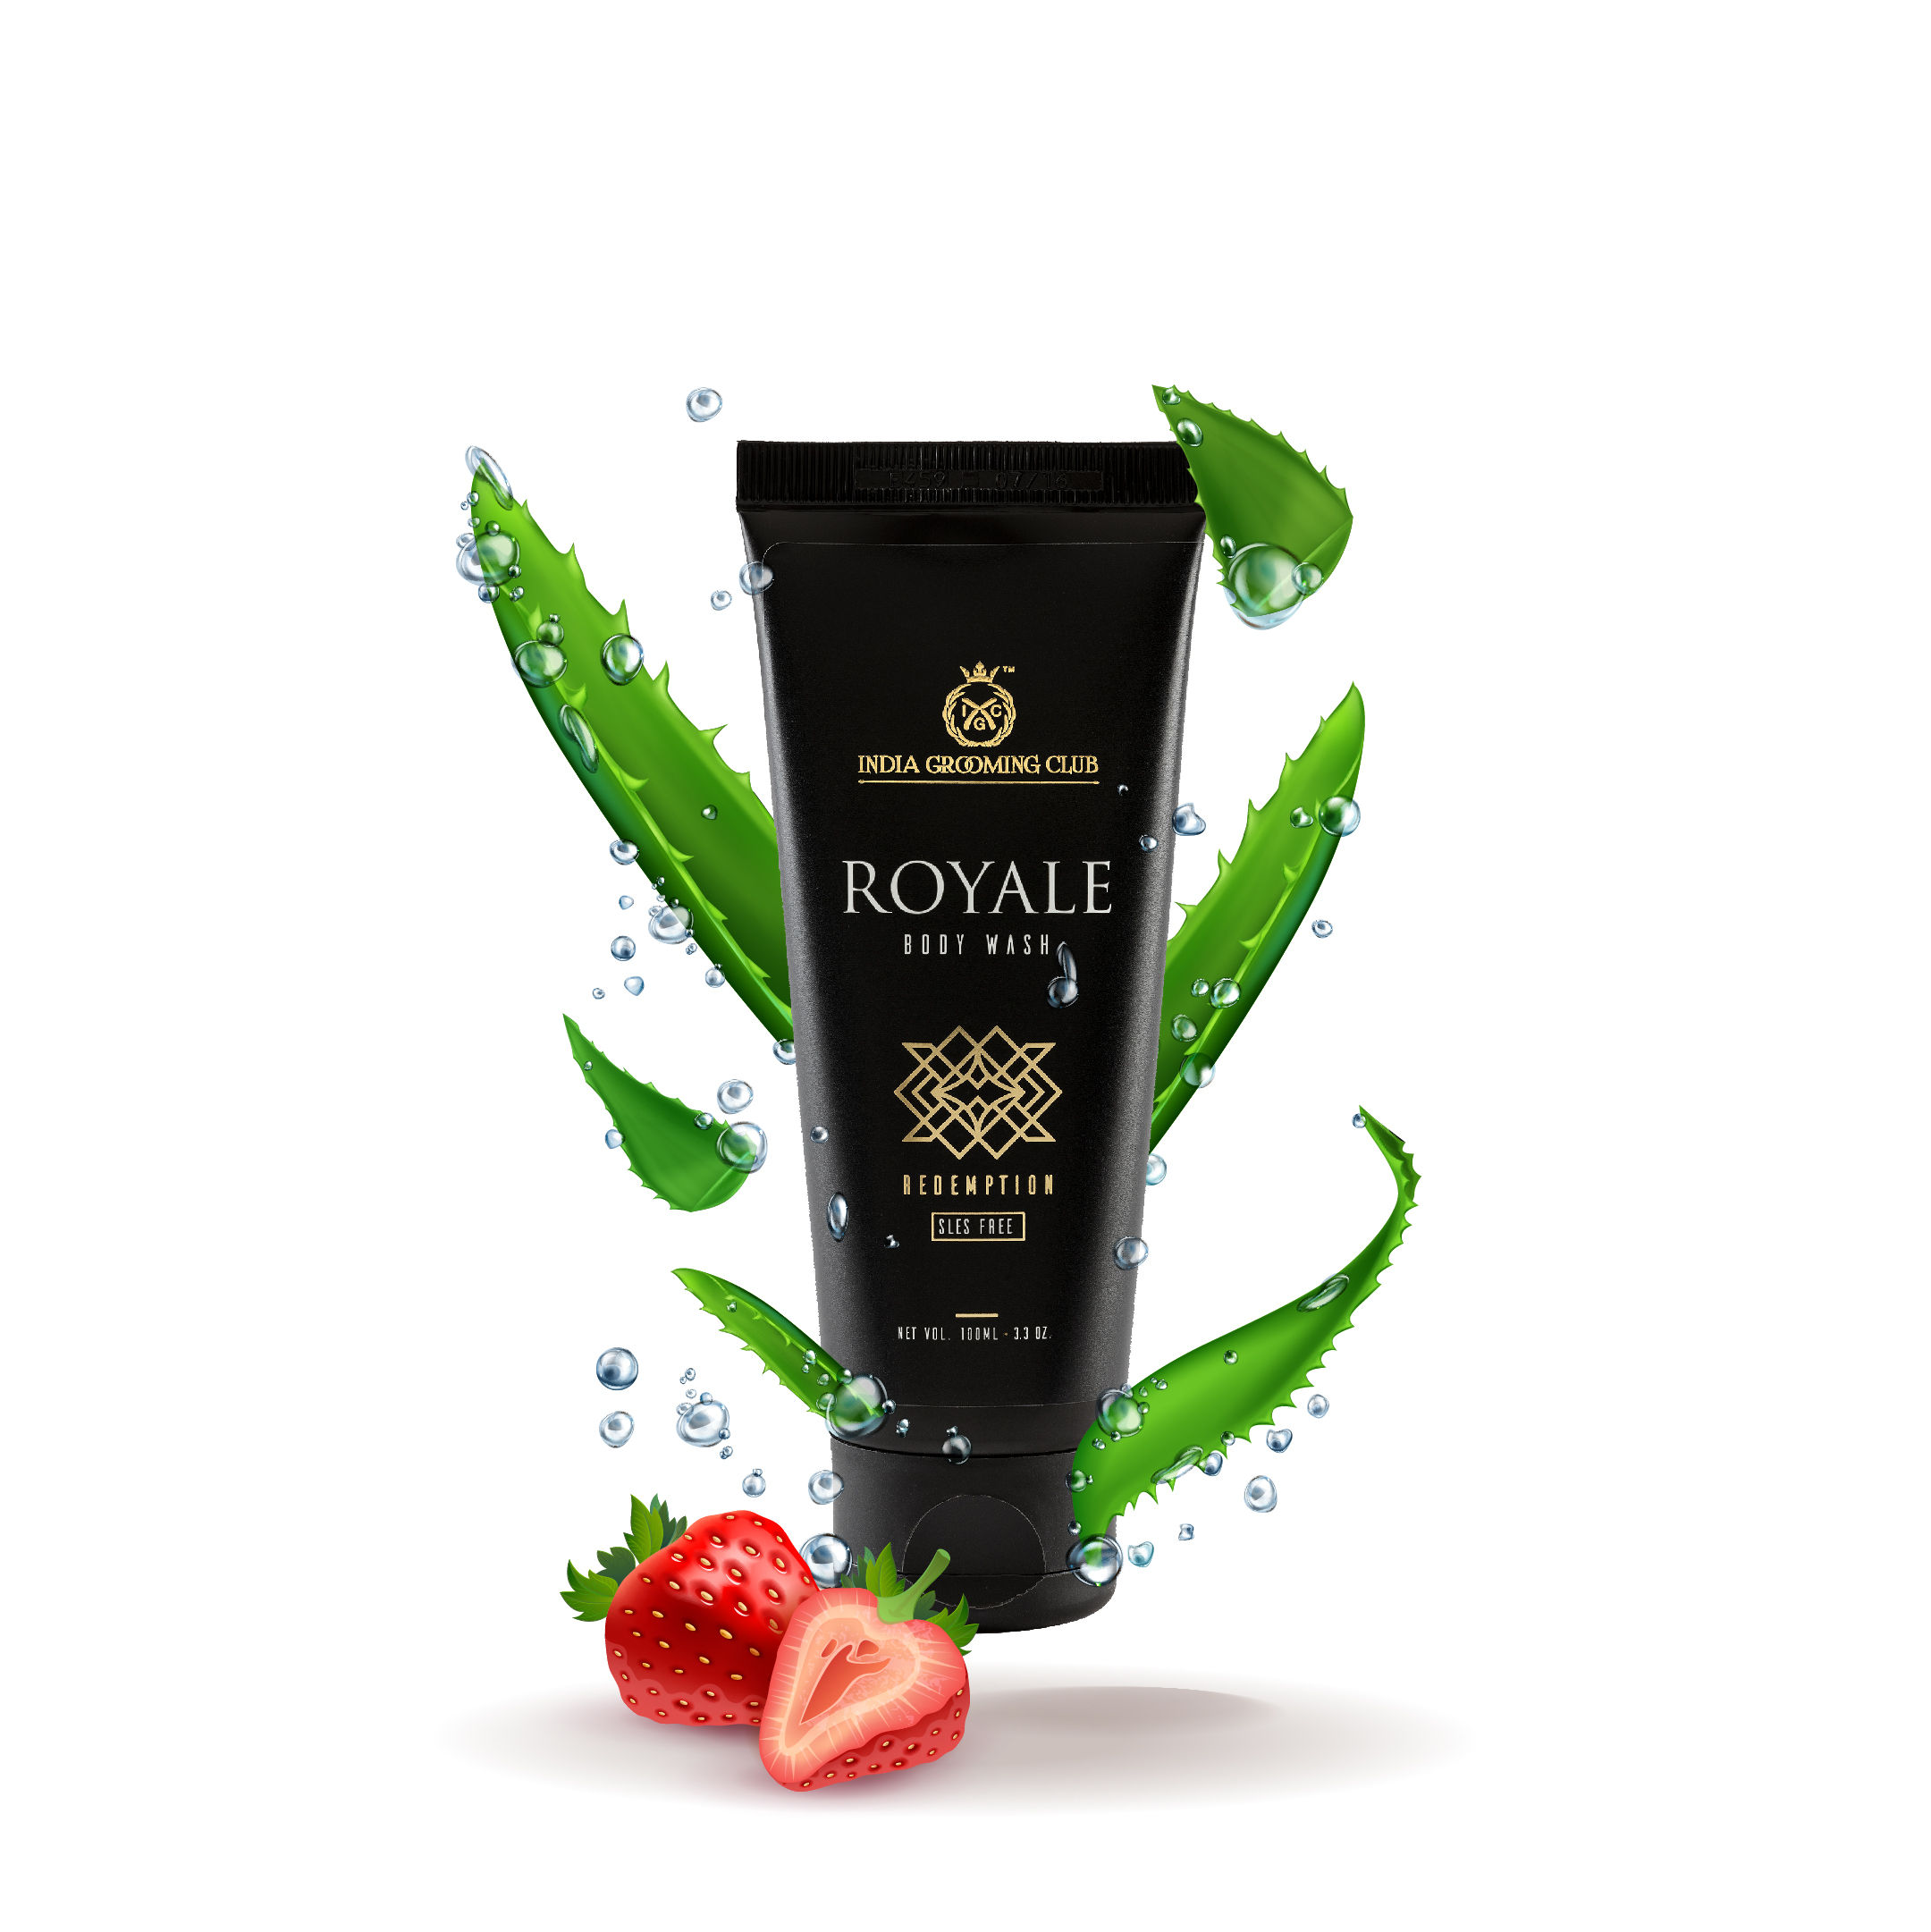 India Grooming Club Royale Body Wash